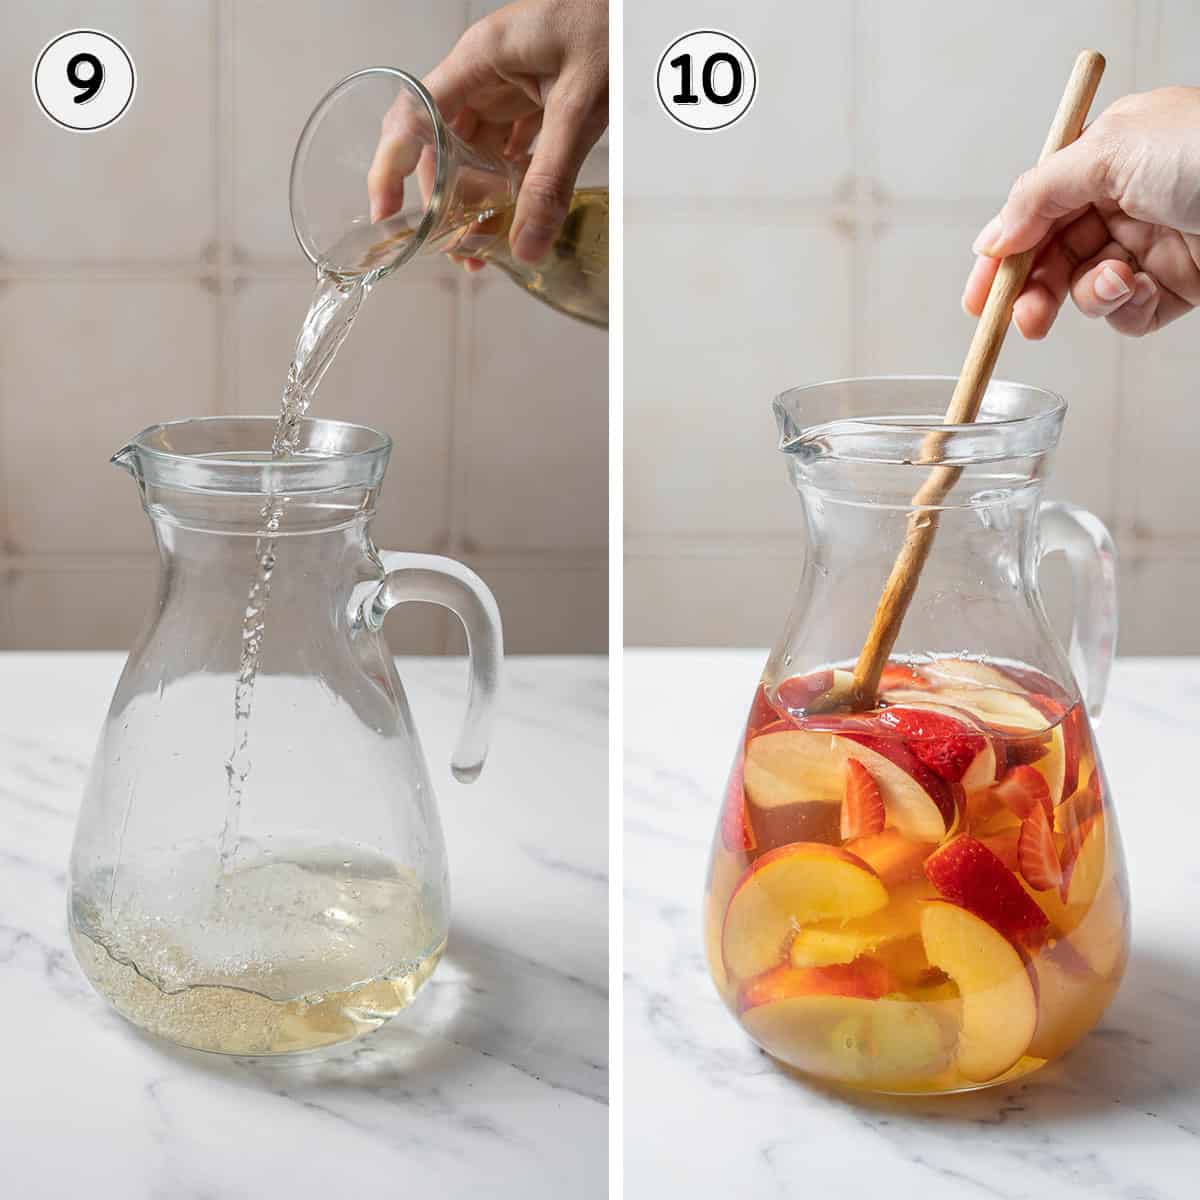 pouring the white wine into a glass pitcher and adding the fruit.